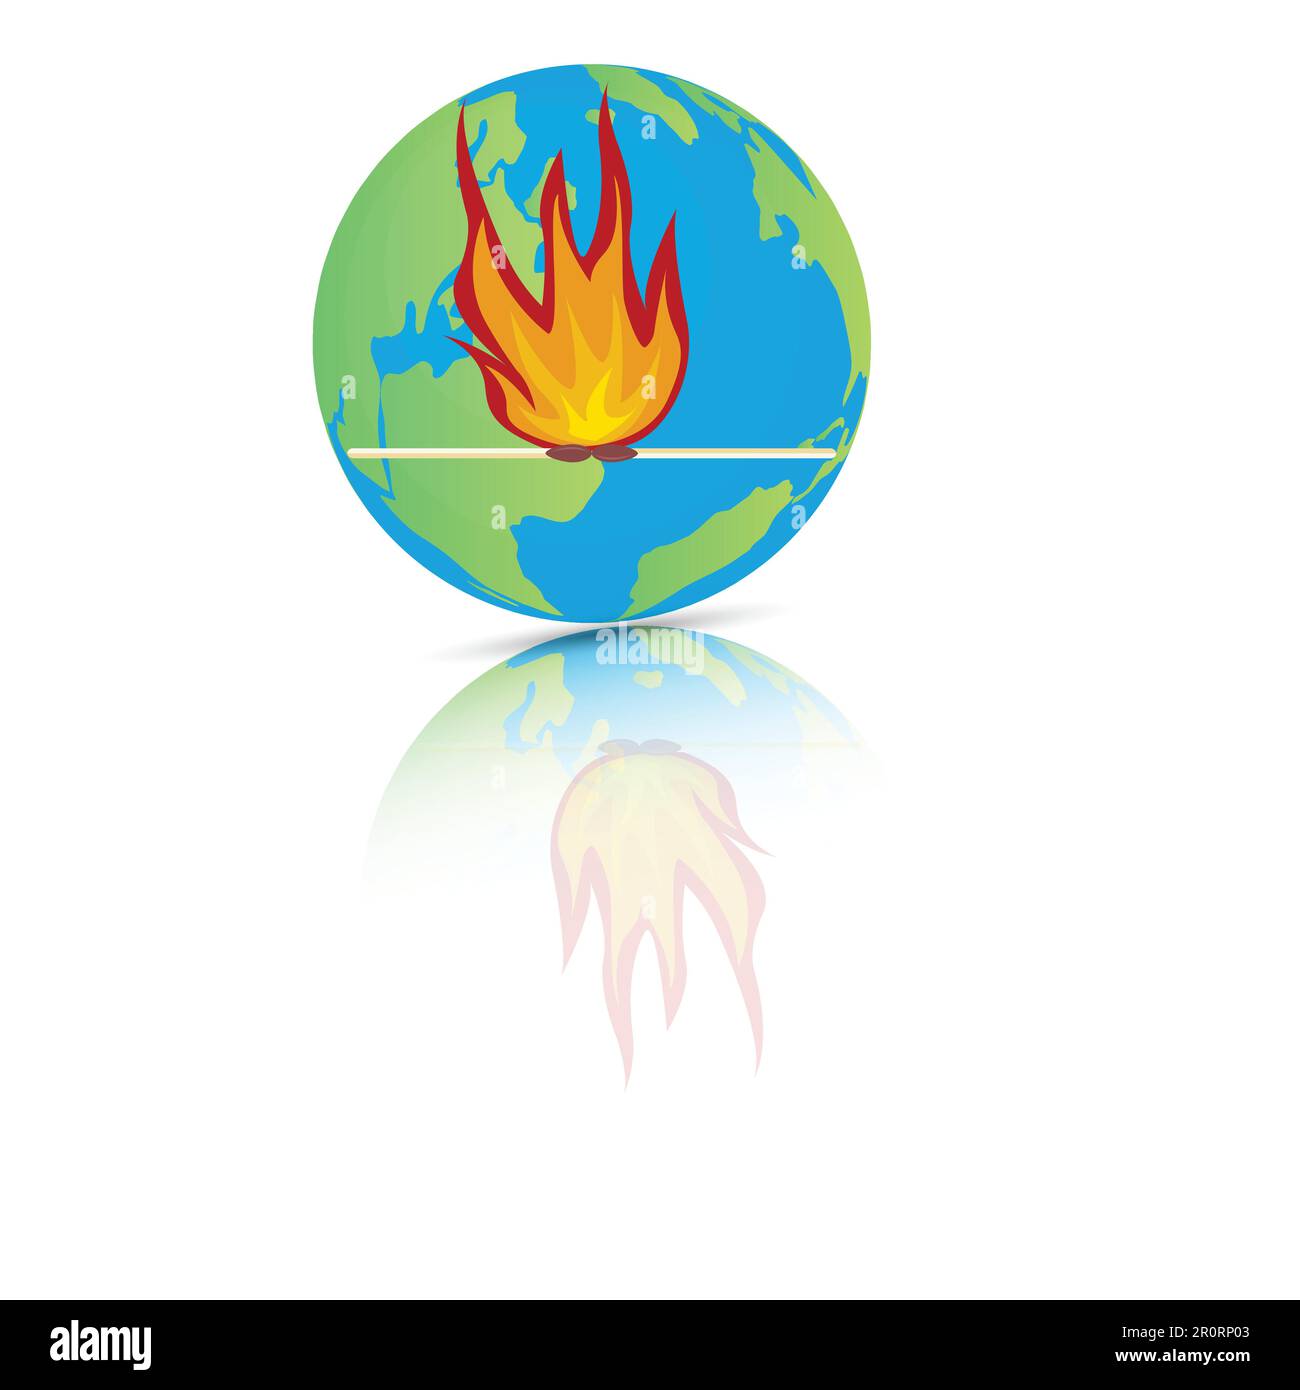 Matches with fire and flames on earth globe Stock Vector